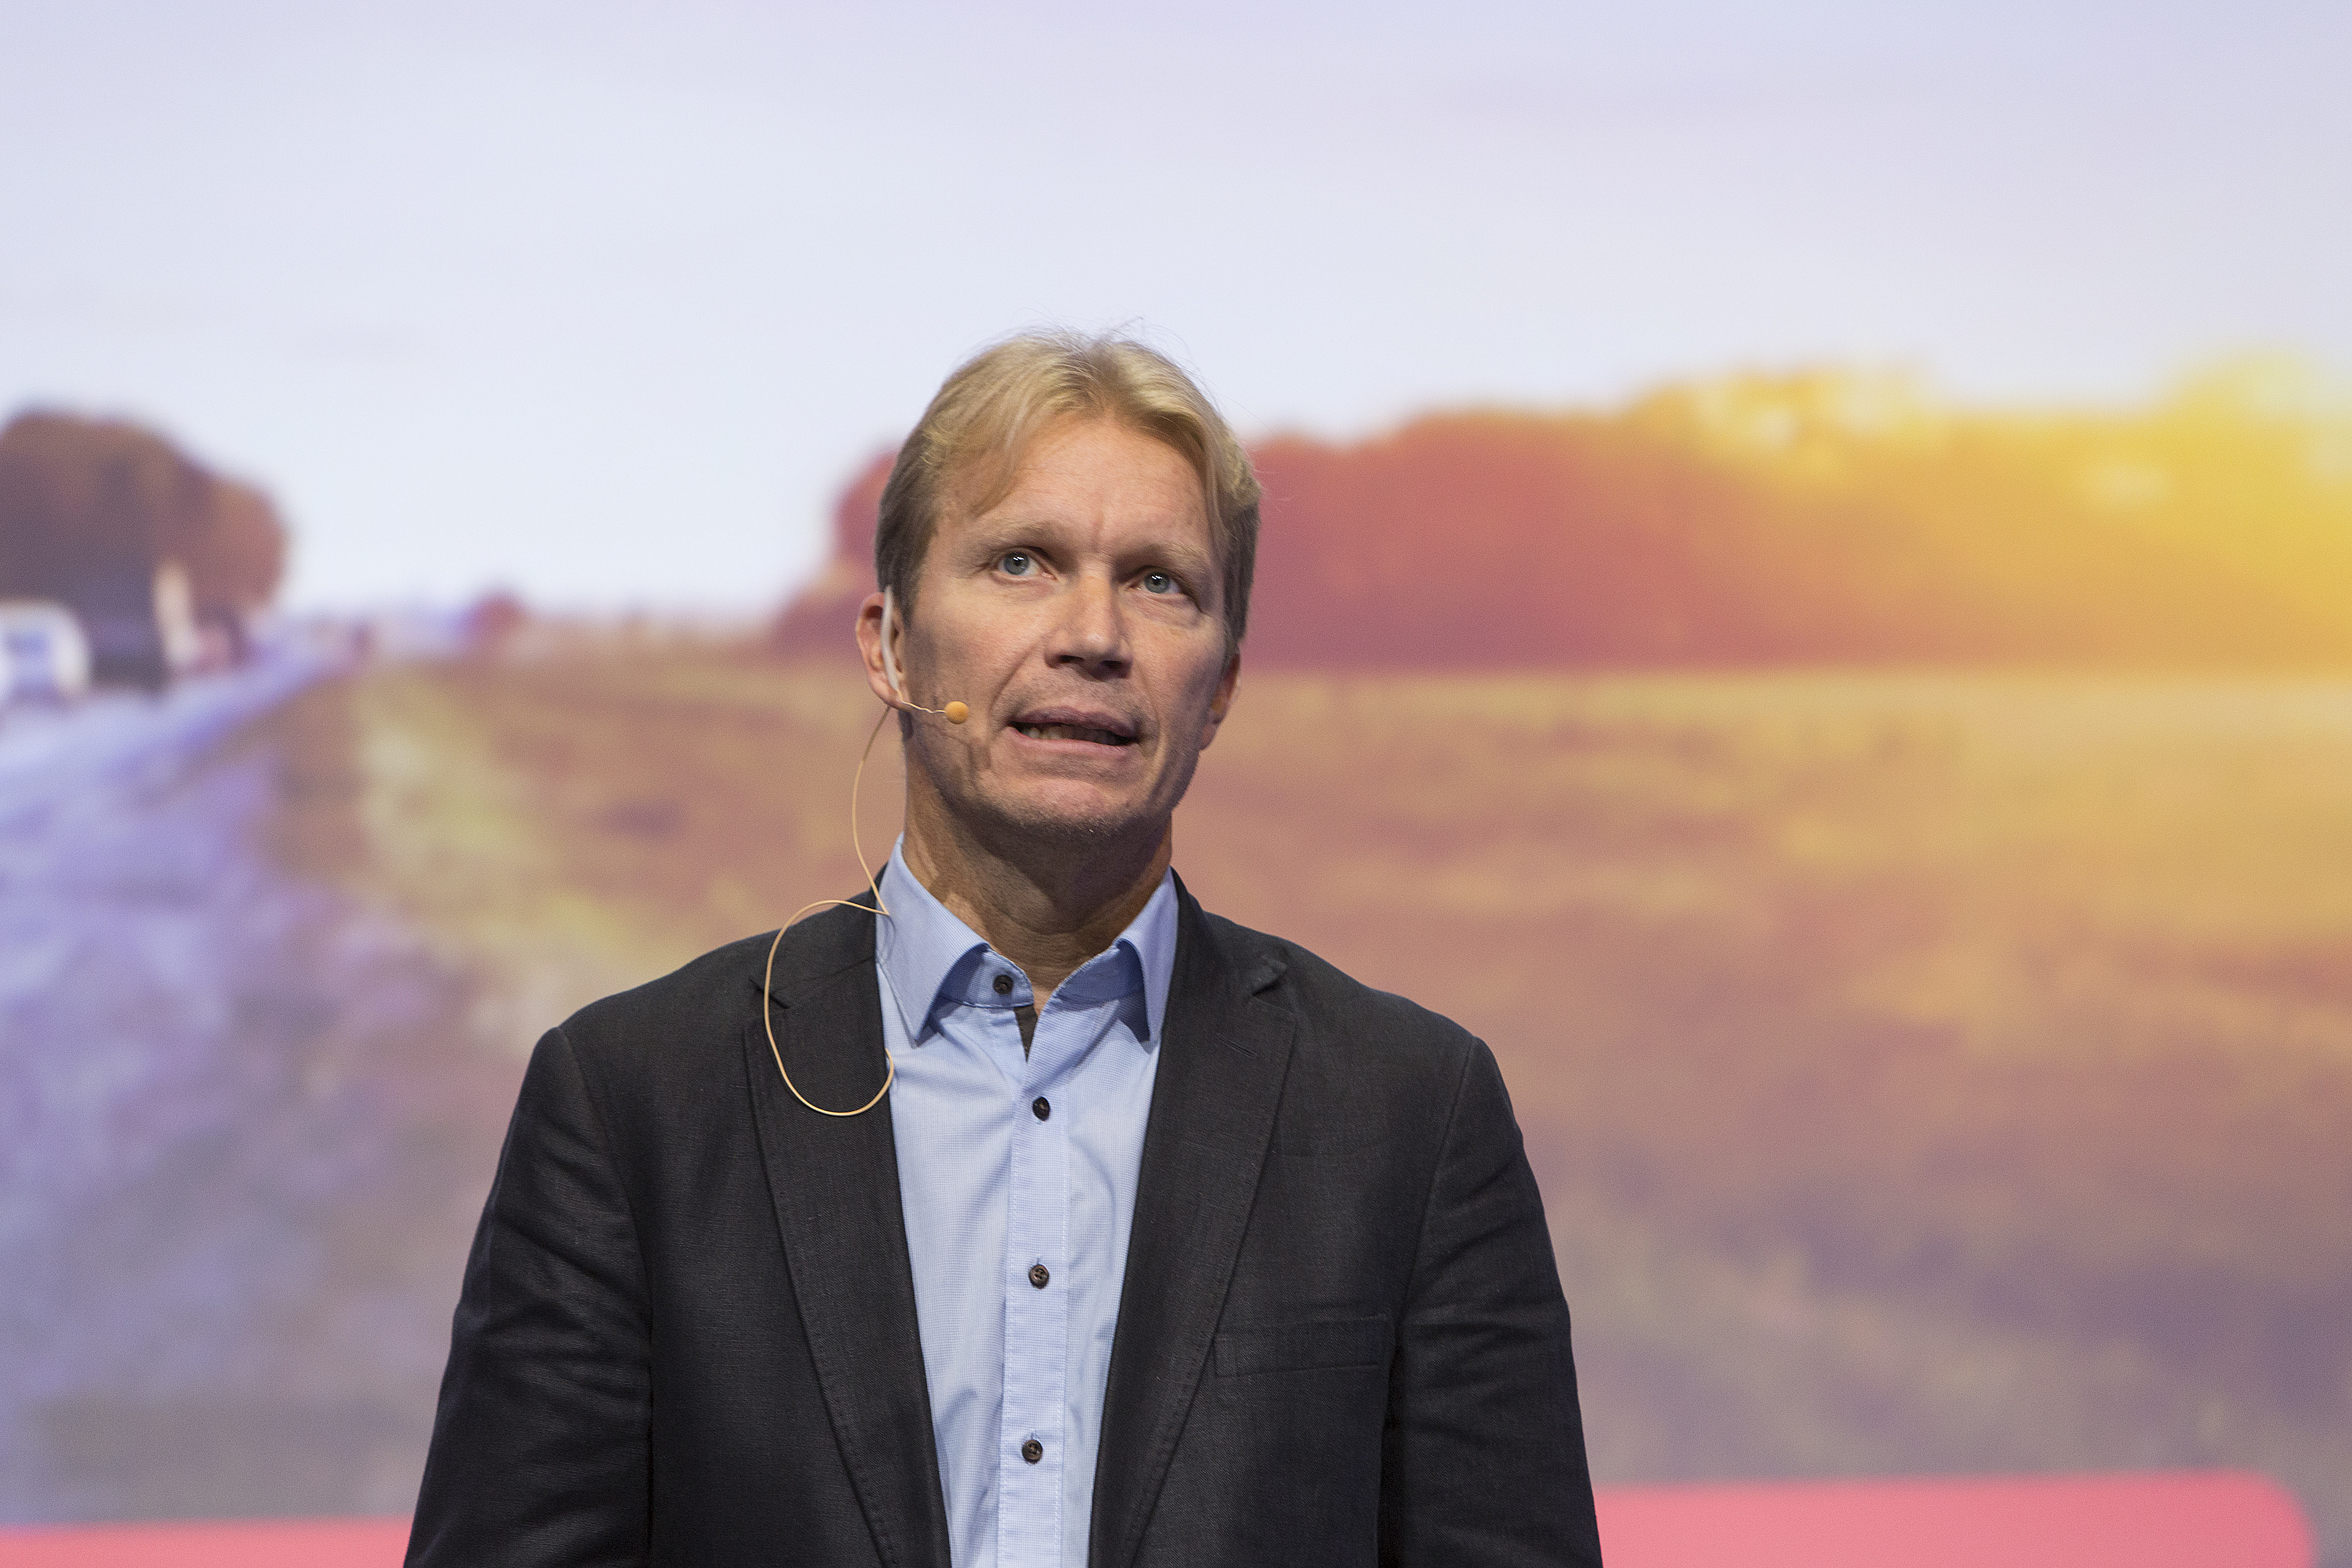 ”The positive effects would particularly include those related to climate refugees,” said Anttonen in his speech on Thursday during the Forest Days organised annually in Helsinki by the Finnish Forest Association. Photo: Erkki Oksanen